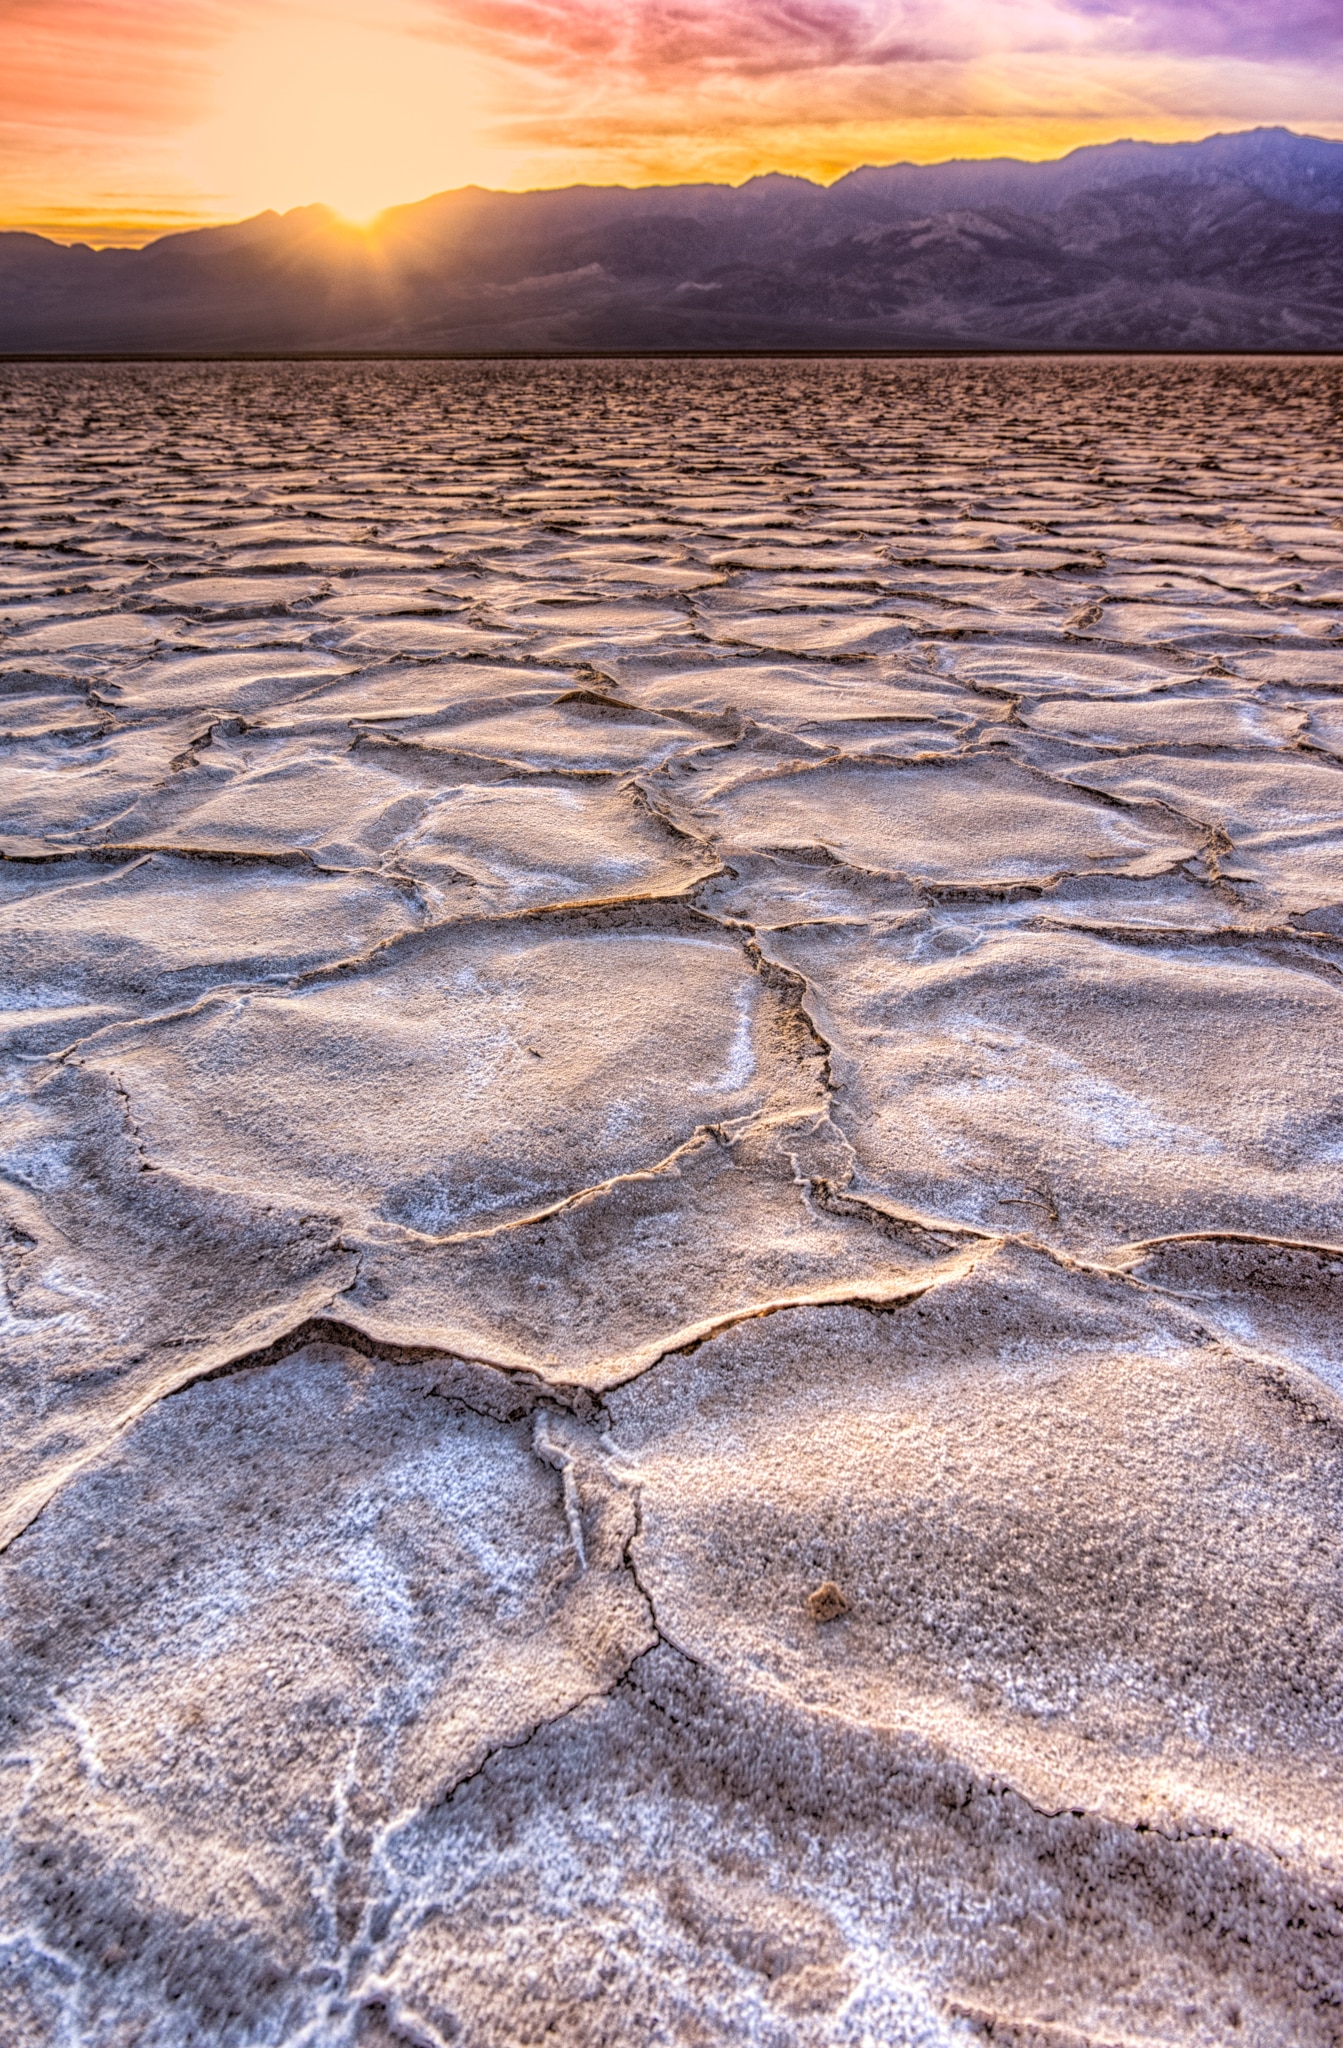 The low angle of the setting sun highlights the hexagonal plates of salt crystals in Badwater Basin in Death BValley National Park, California